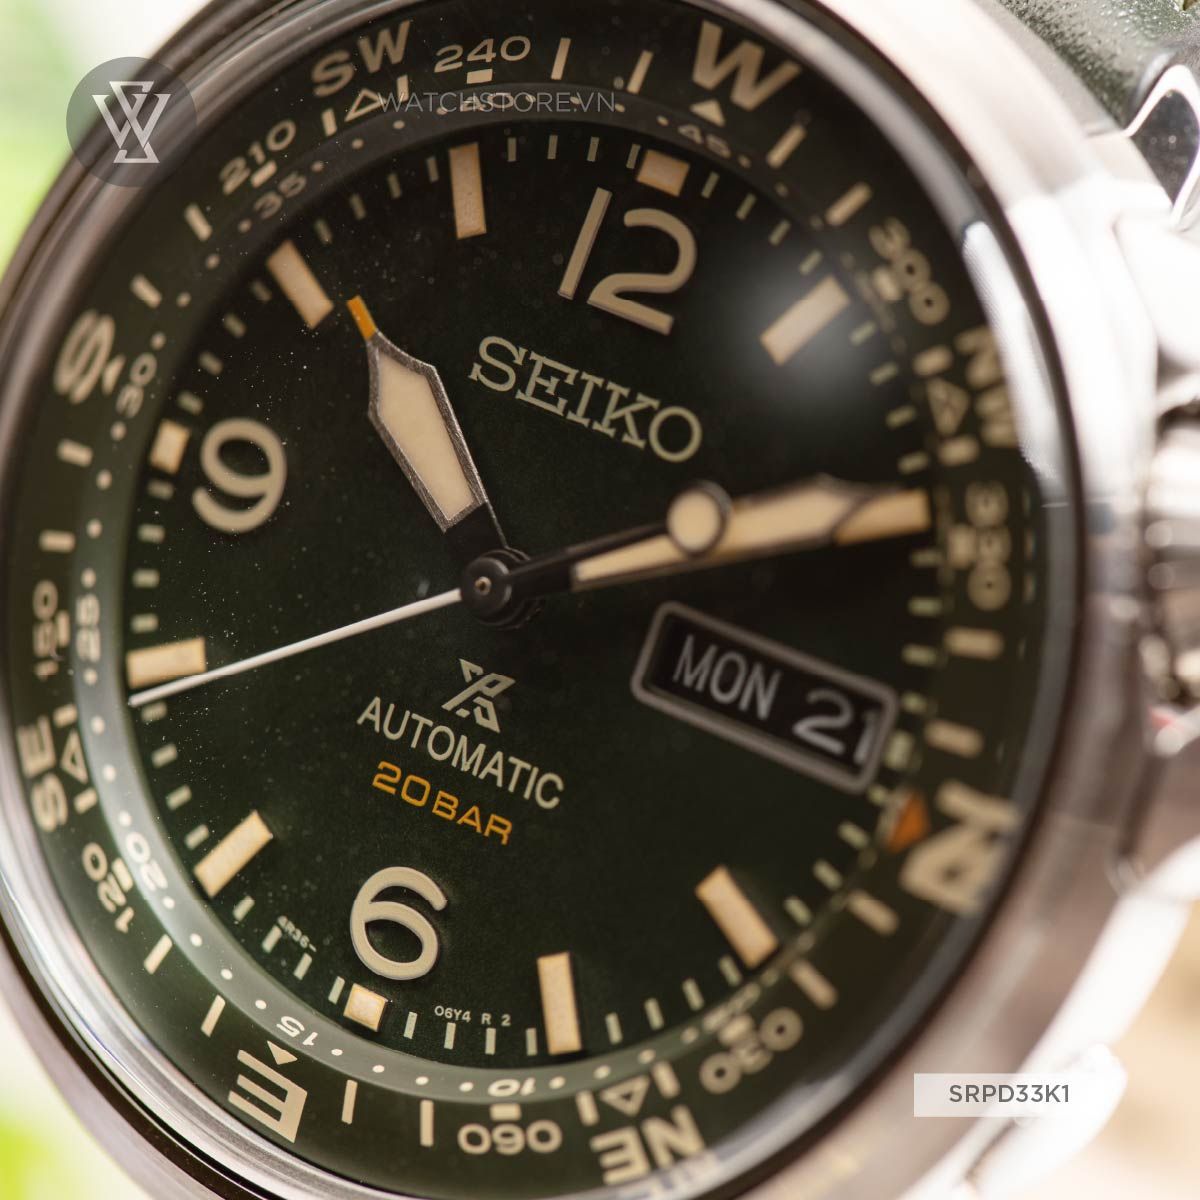 Seiko SRPDK1   What do you think of the new seiko with compass